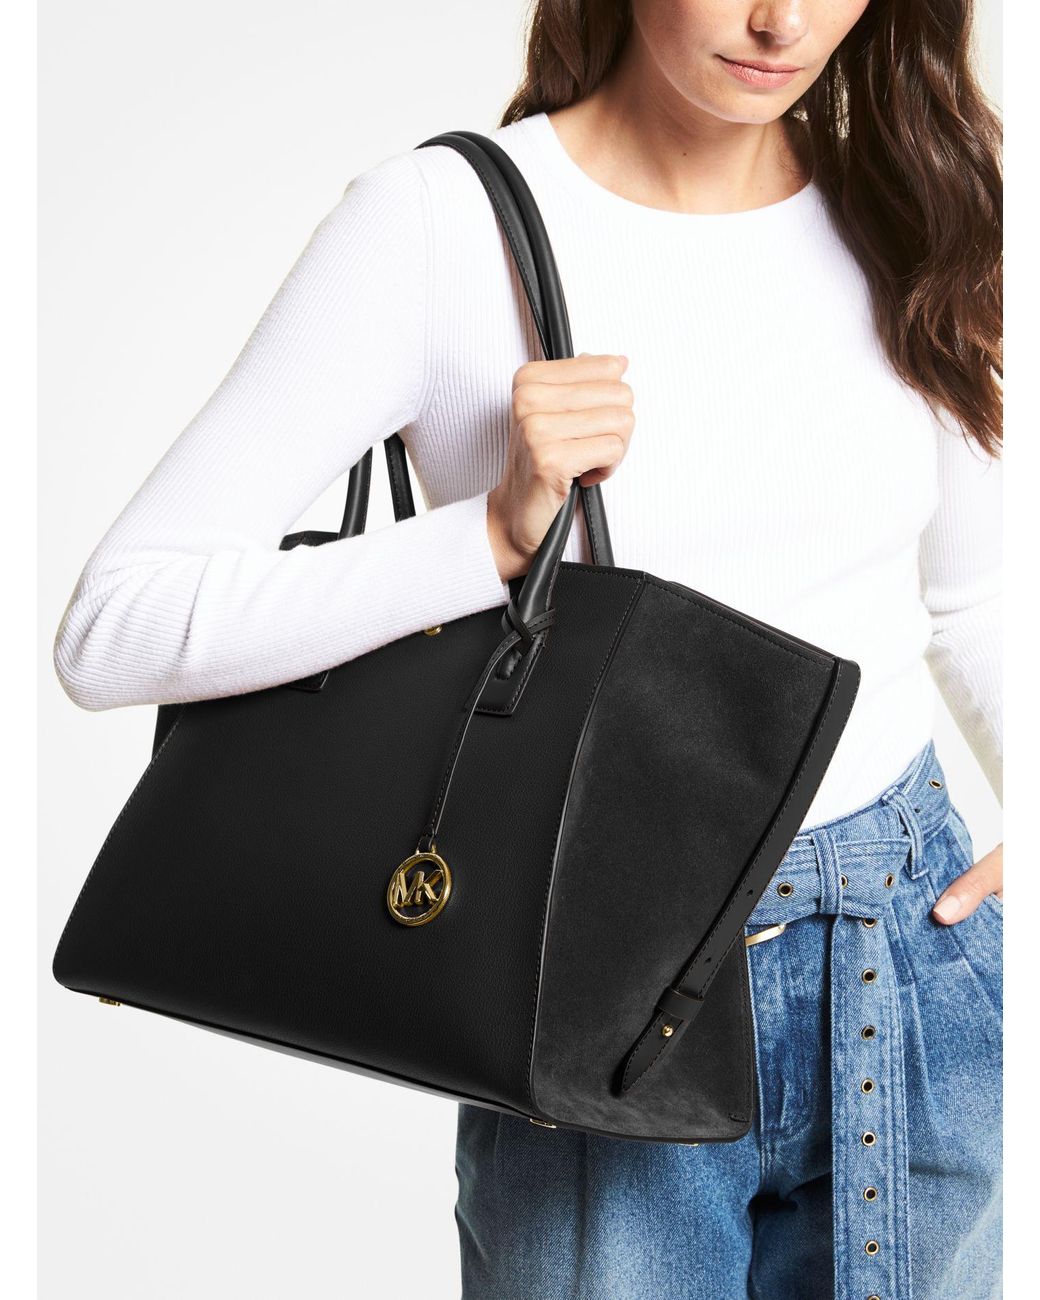 Michael Kors Avril Extra-large Leather Top-zip Tote Bag in Black | Lyst